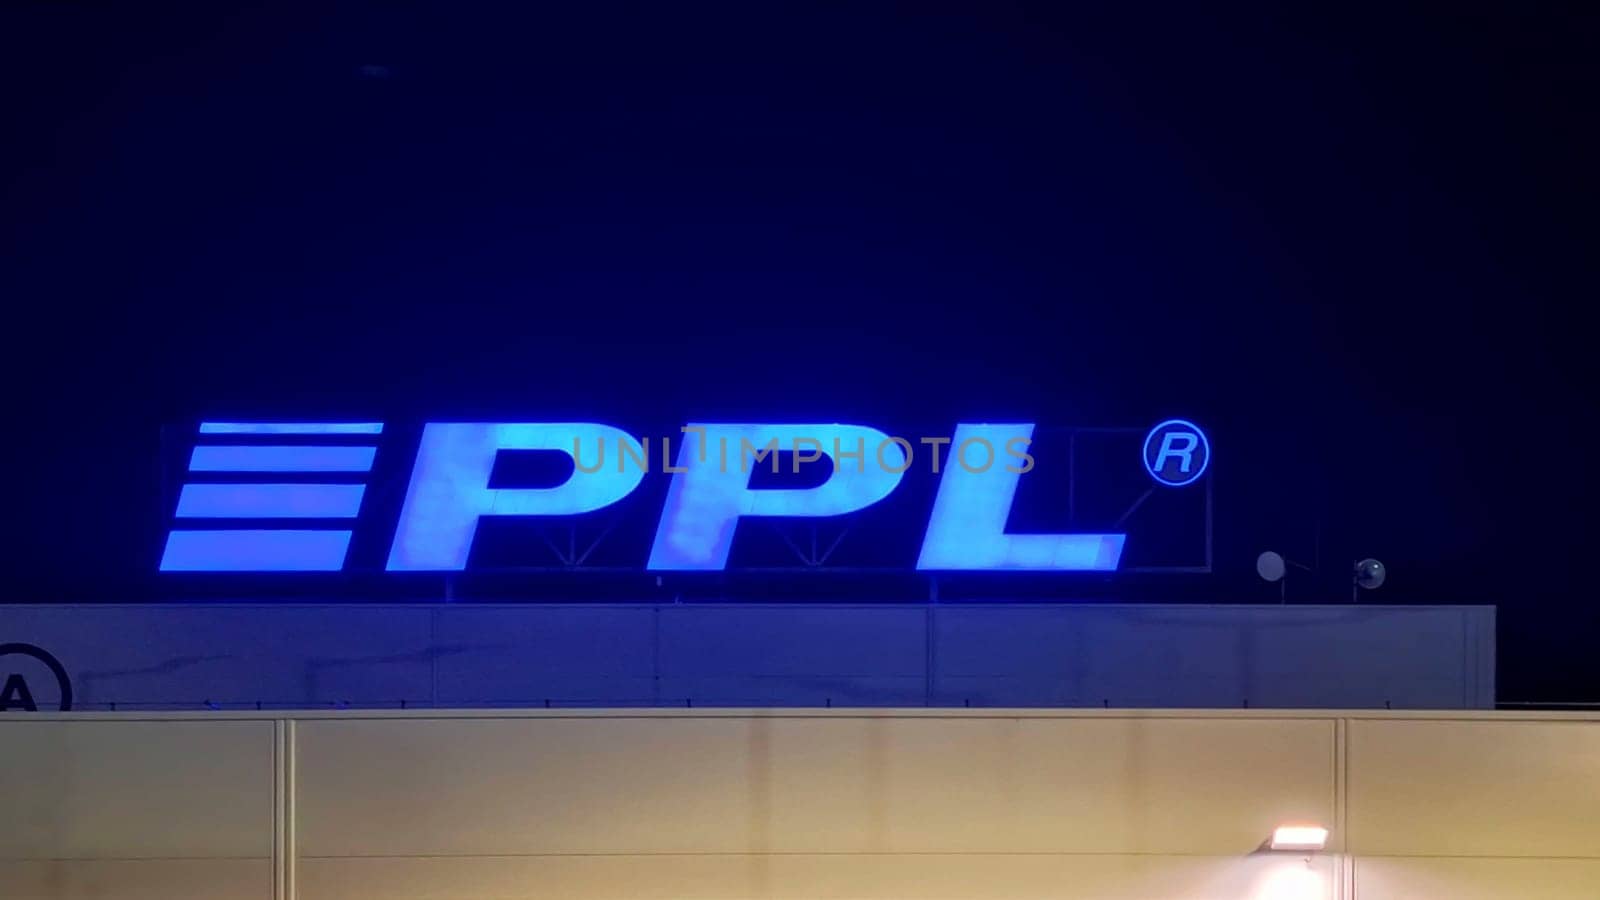 PPL logo on the depot building. PPL CZ specializes in parcel transport not only in the Czech Republic, but also throughout Europe. It employs over 1000 staff and 2,000 drivers who deliver tens of millions of shipments every year. by roman_nerud